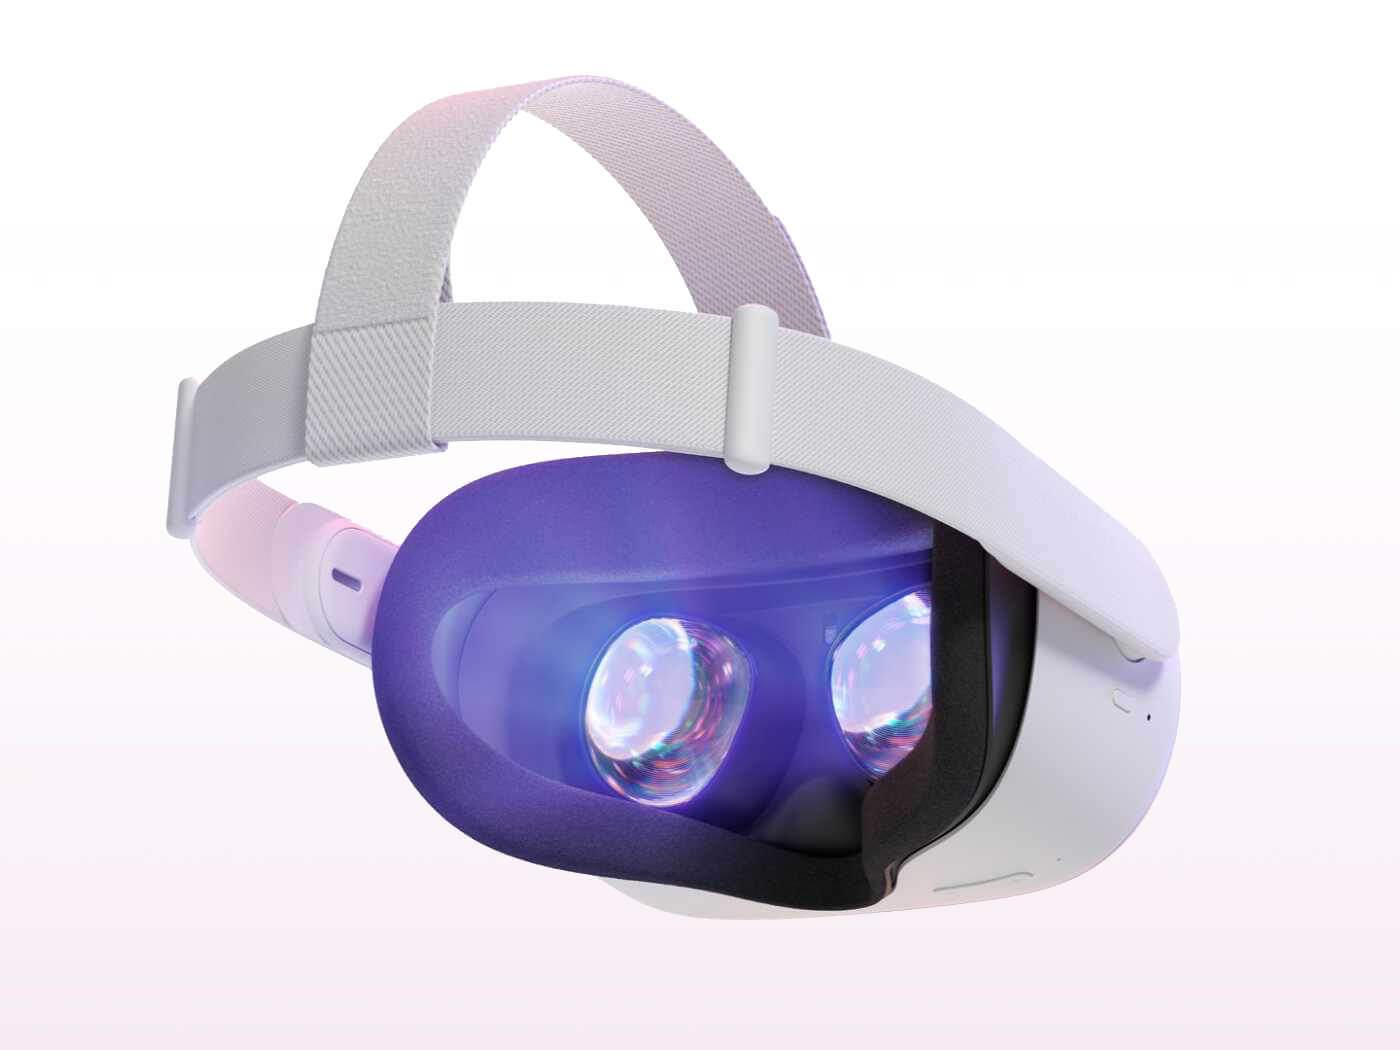 Oculus Quest 2 Blue Light Filter - Is Blue Light Bad And Should You Turn On The Night Display